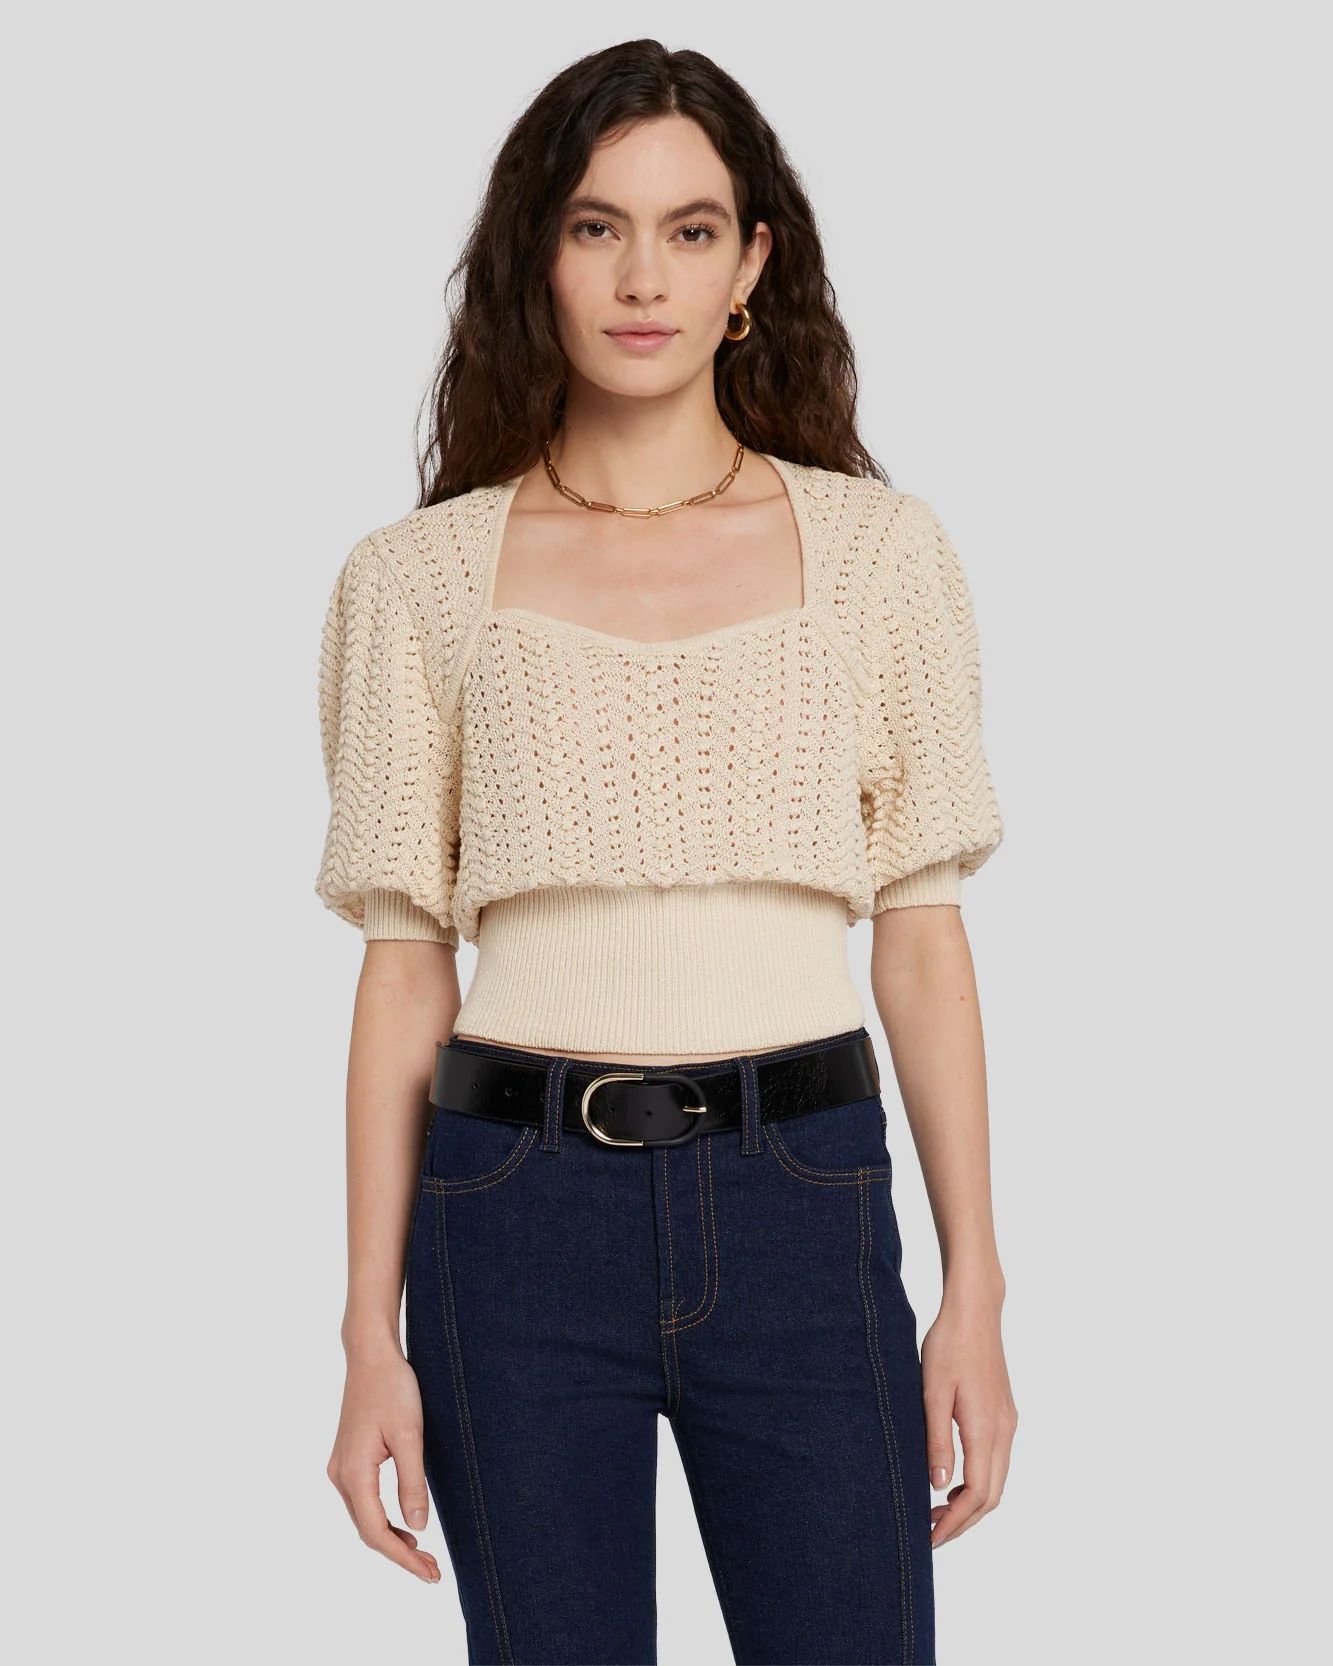 Sweetheart Pointelle Knit Sweater in Bone | 7 For All Mankind | 7 For All Mankind